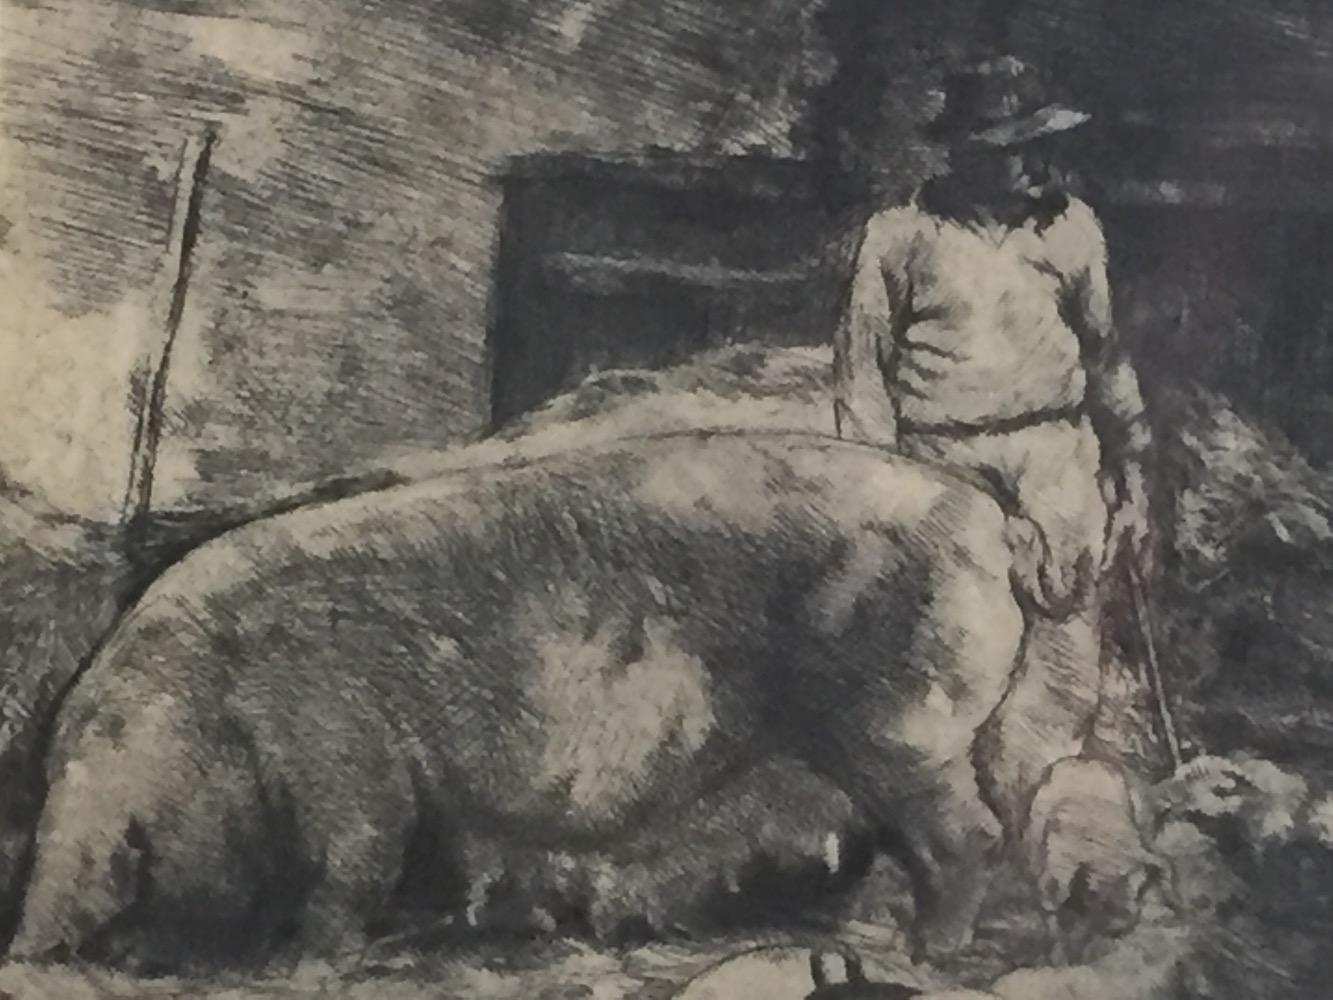 The Farmer with his pigs